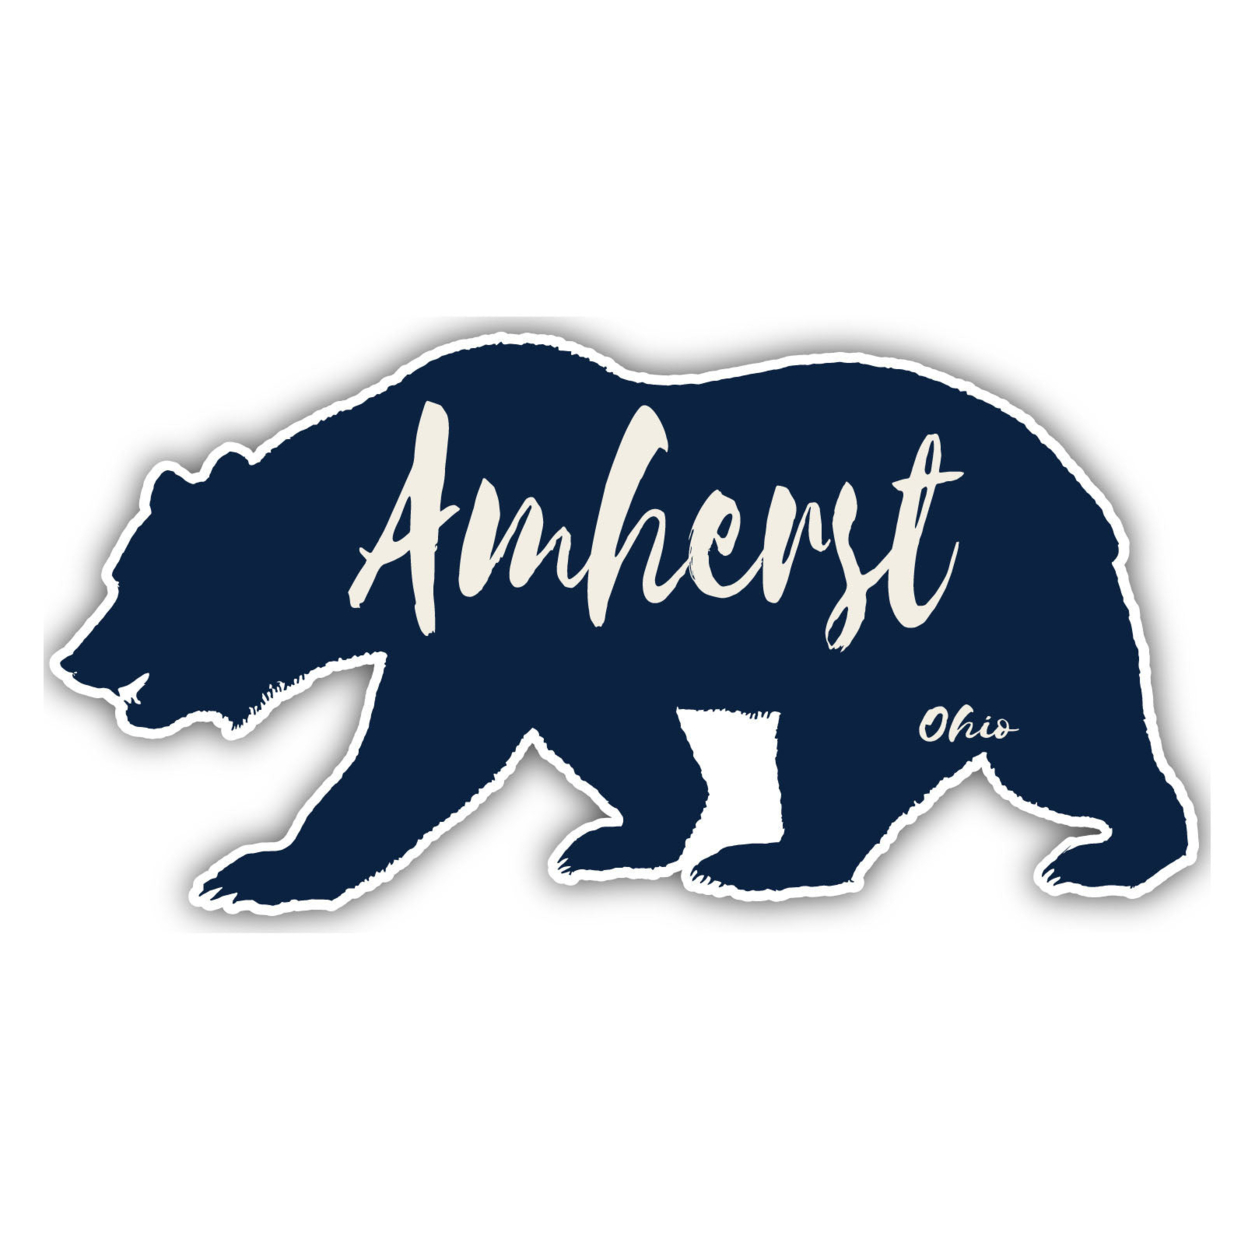 Amherst Ohio Souvenir Decorative Stickers (Choose Theme And Size) - 4-Pack, 2-Inch, Bear